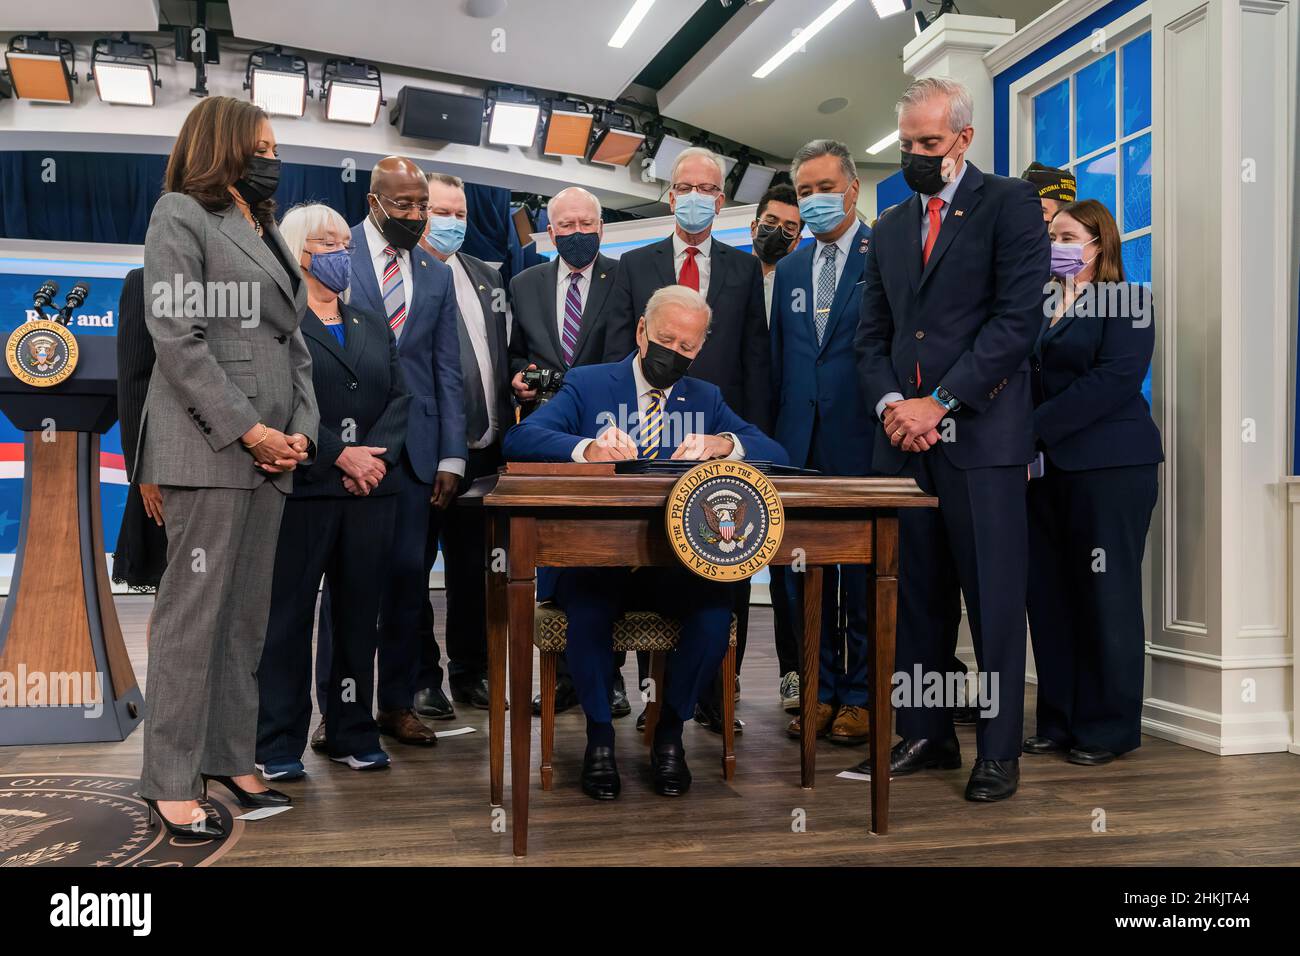 President Joe Biden, joined by Vice President Kamala Harris and Secretary of Veterans Affairs Denis McDonough, front row at right, signs the “Requiring the GAO Report on Race and Ethnicity Bill”, one of four bipartisan Veterans bills that he signs Tuesday, November 30, 2021, in the South Court Auditorium in the Eisenhower Executive Office Building at the White House. (Official White House Photo by Cameron Smith) Stock Photo